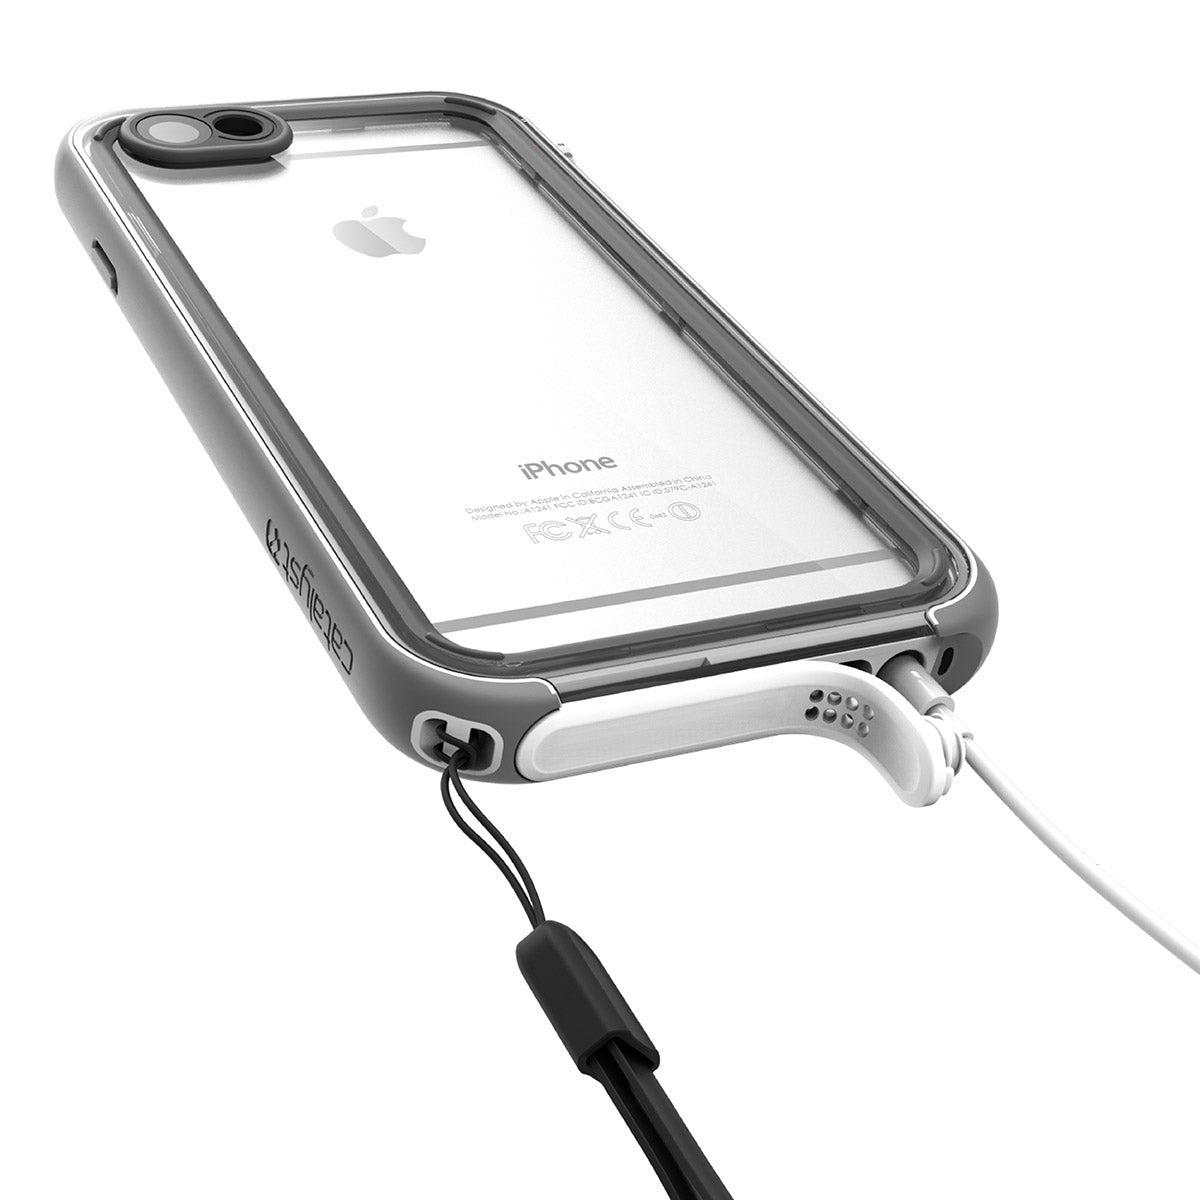 Catalyst iphone 6s waterproof case showing the case while charging with attached lanyard on the side corner in white&mist gray colorway